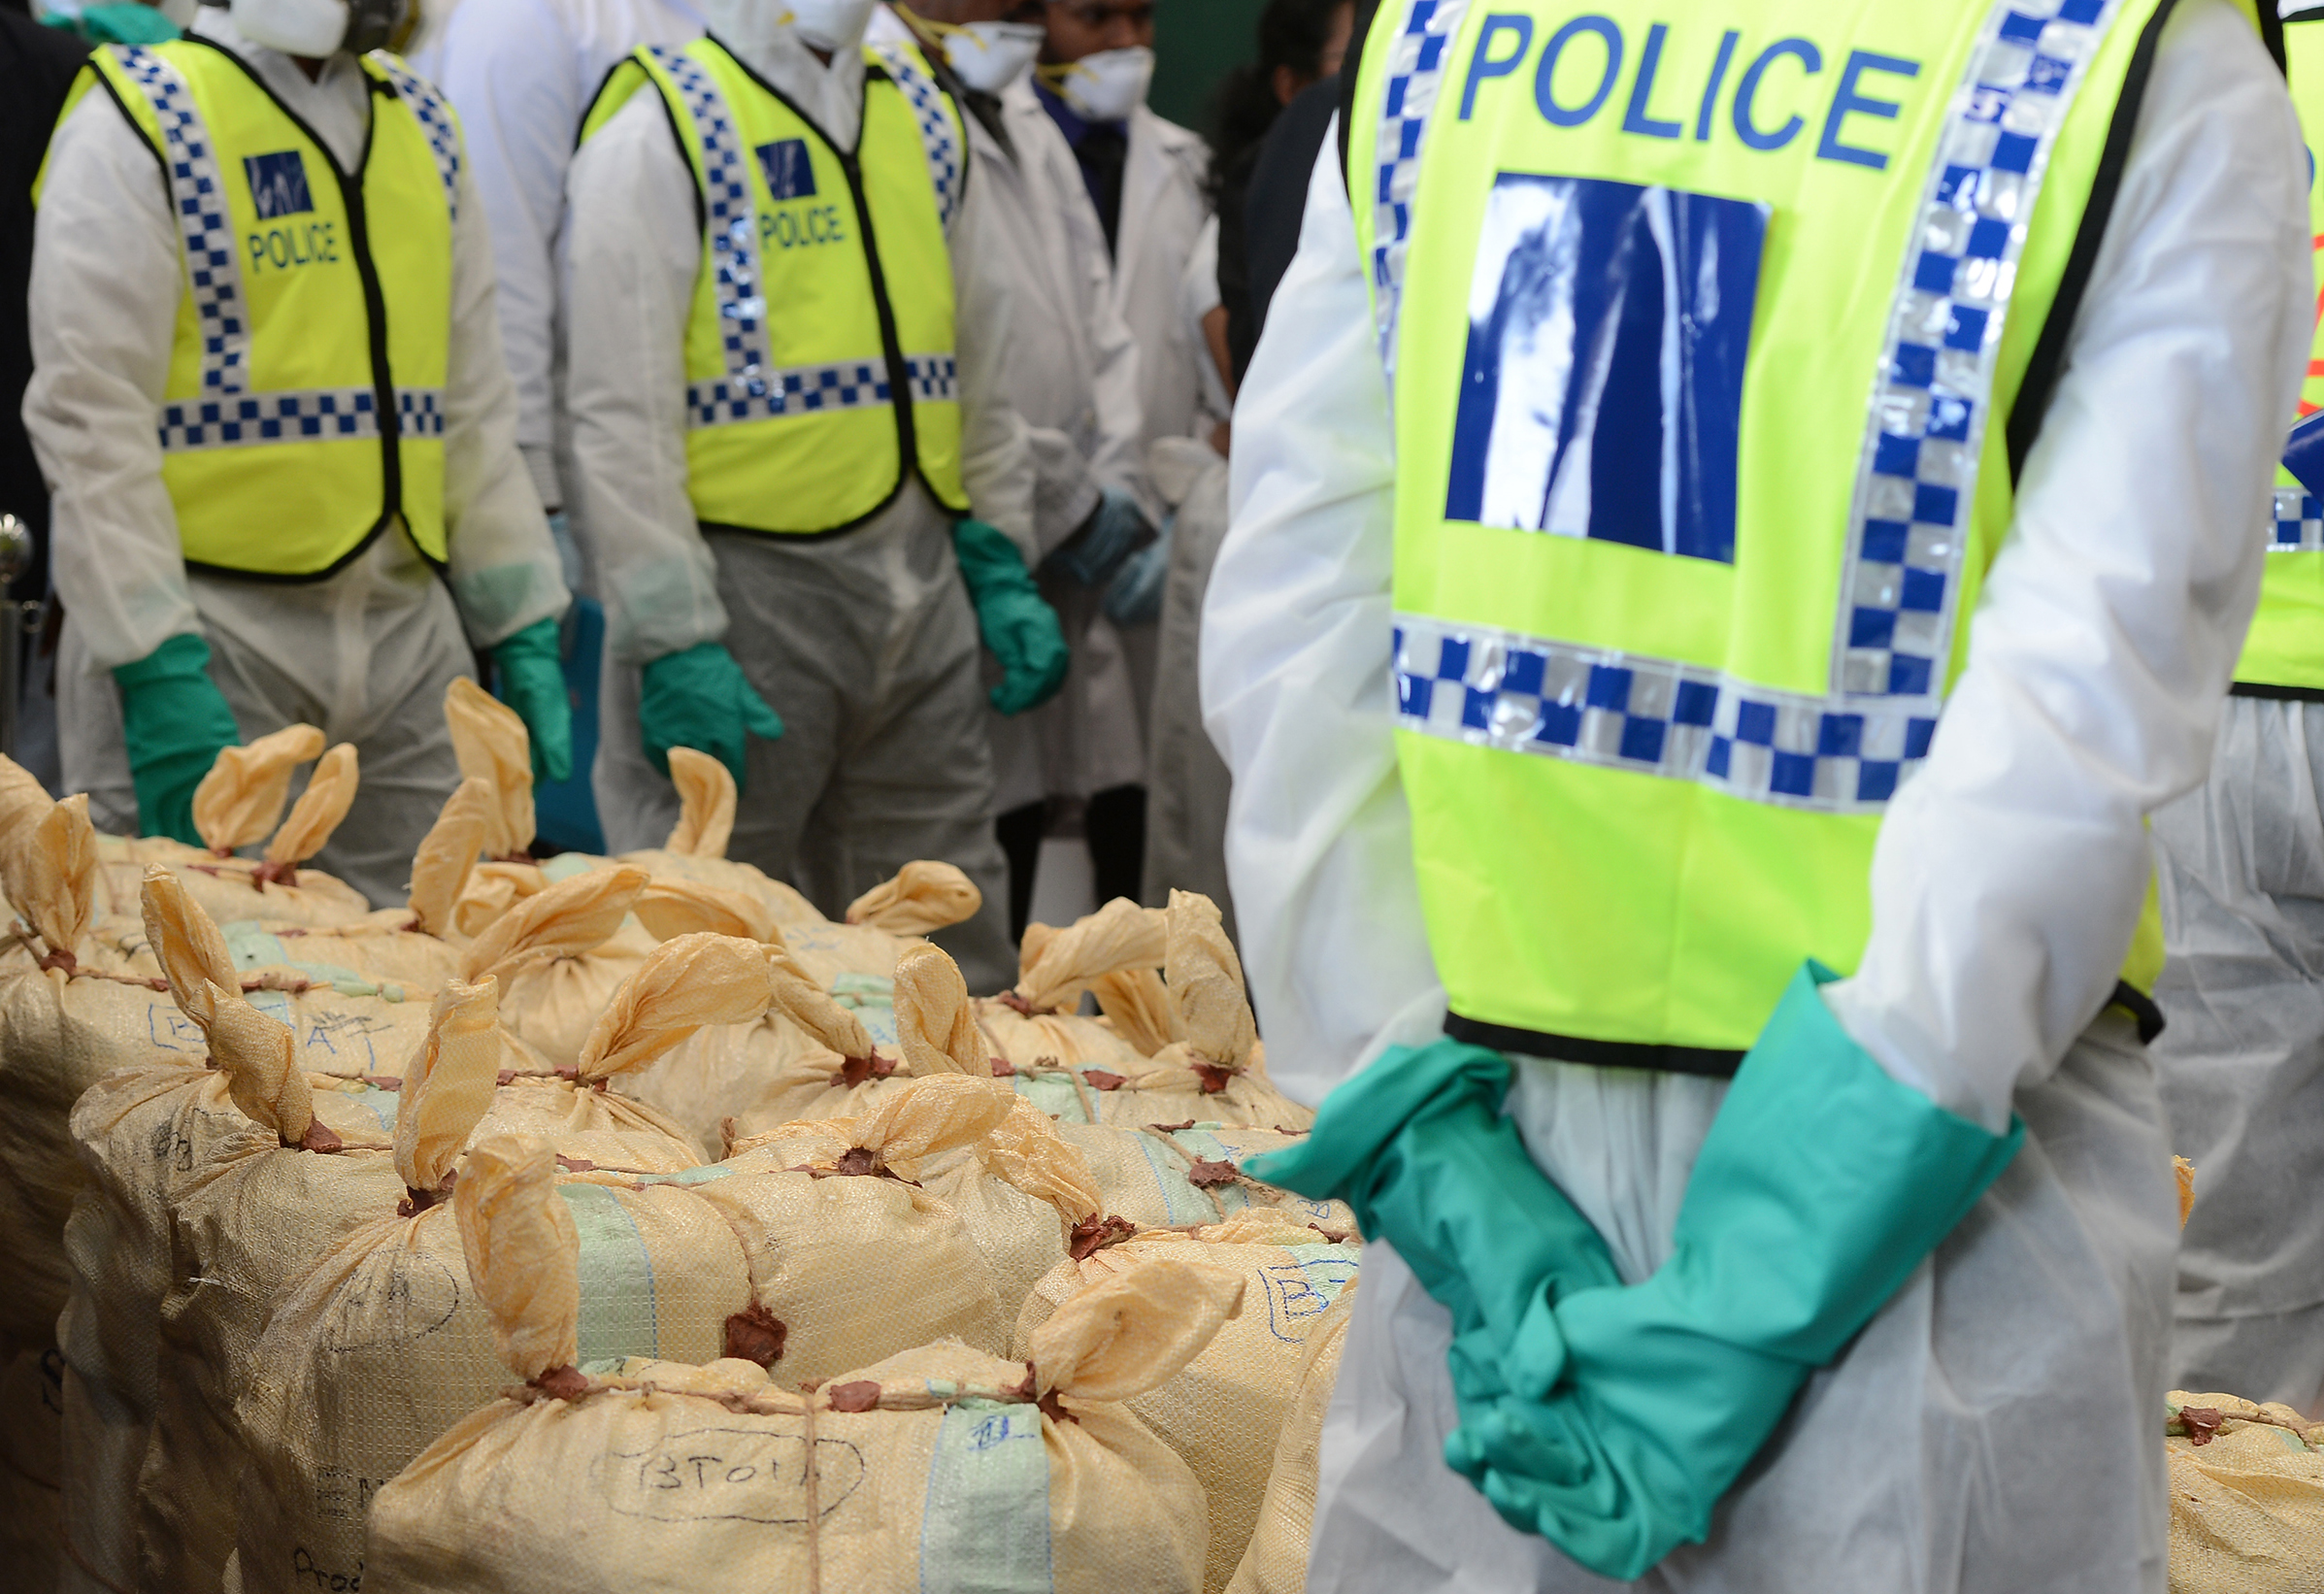 Sri Lankan police personnel prepare seized cocaine to be destroyed under judicial supervision in Katunayake on January 15, 2018. (Lakruwan Wanniarachchi—AFP/Getty Images)